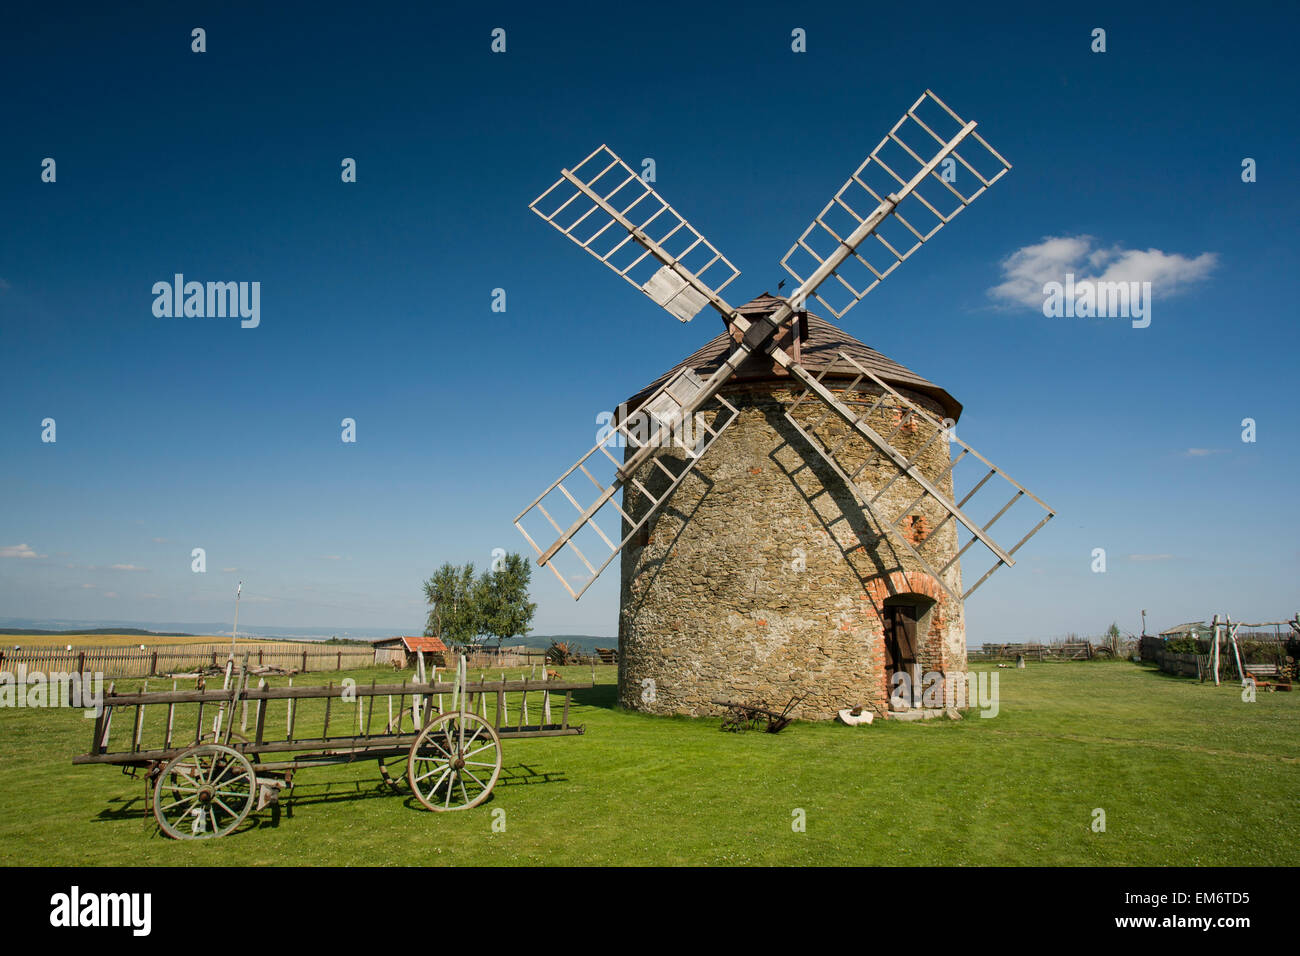 An old wind mill near the town of Vilemov in eastern Czech Republic. The mill is a fully operational flour mill. Stock Photo